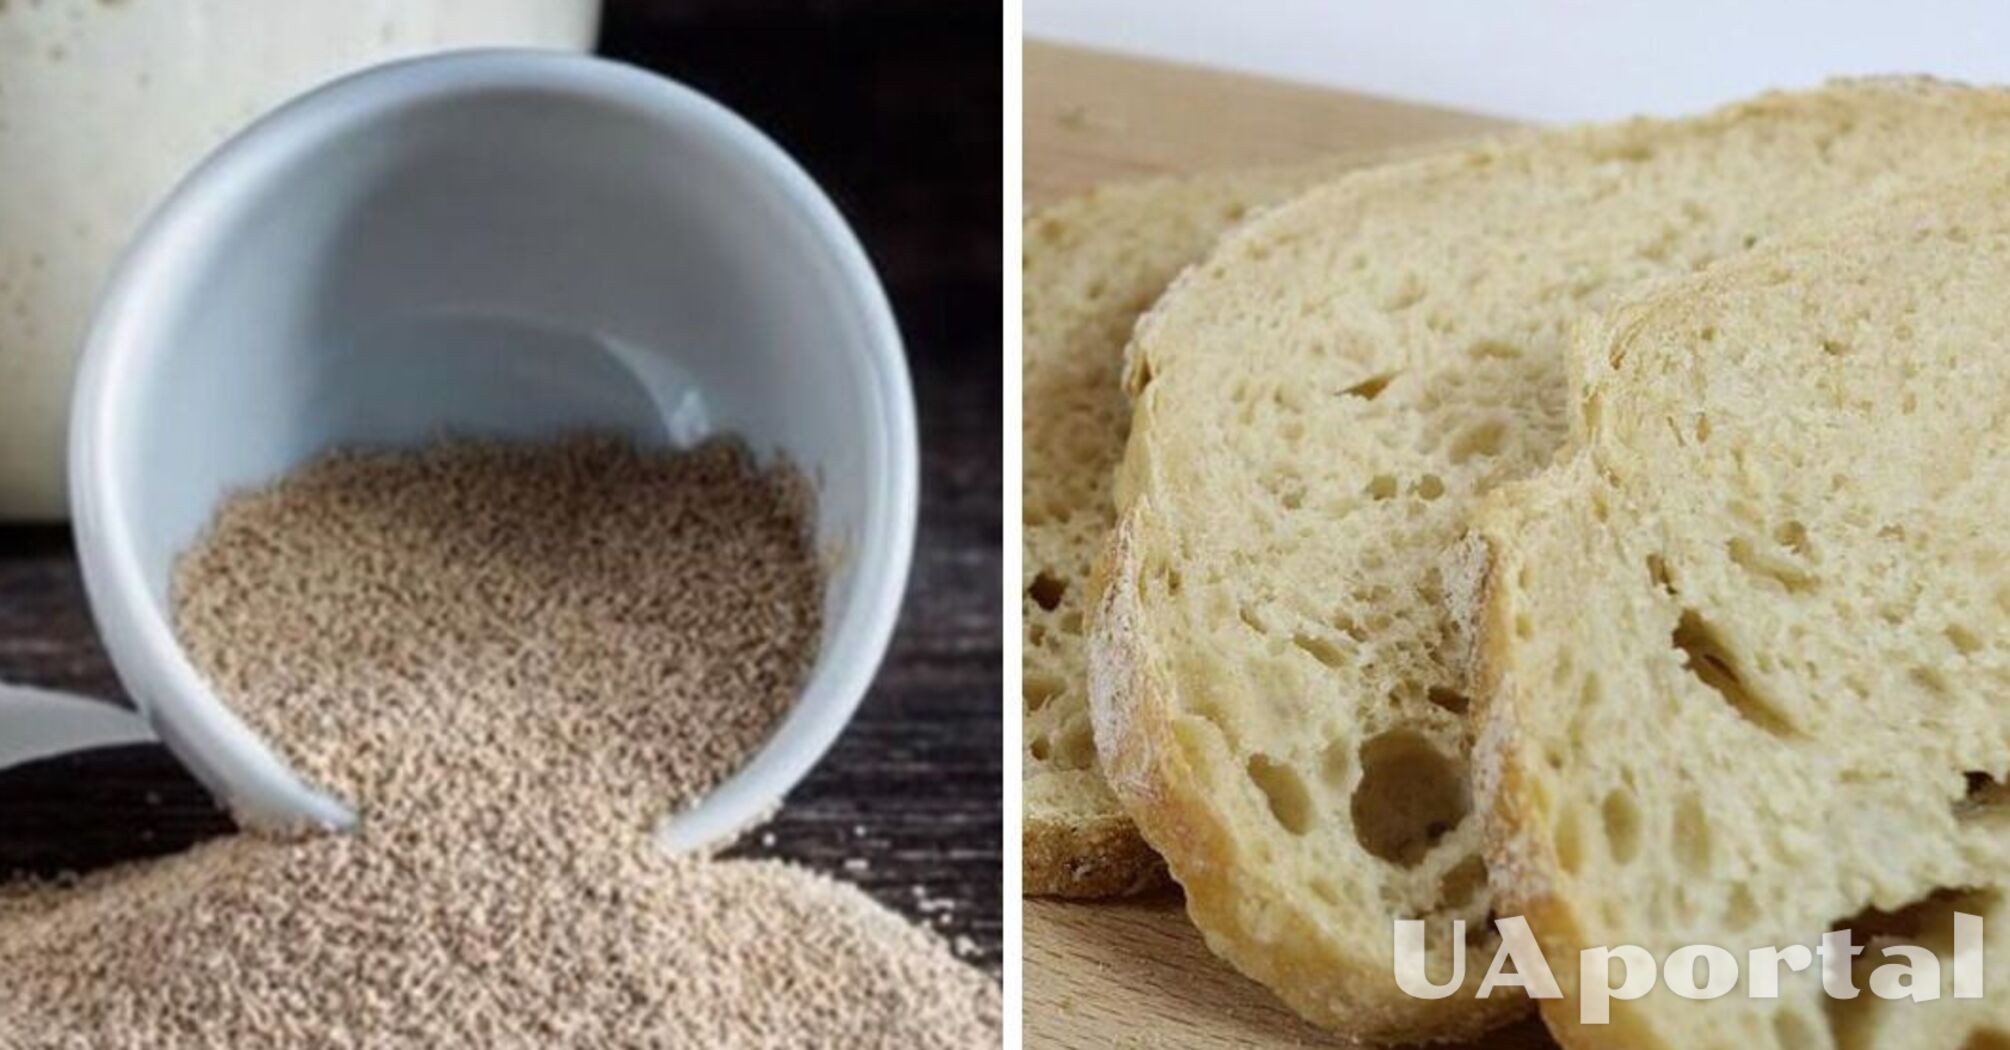 Home yeast: a simple recipe that will quickly become a favorite